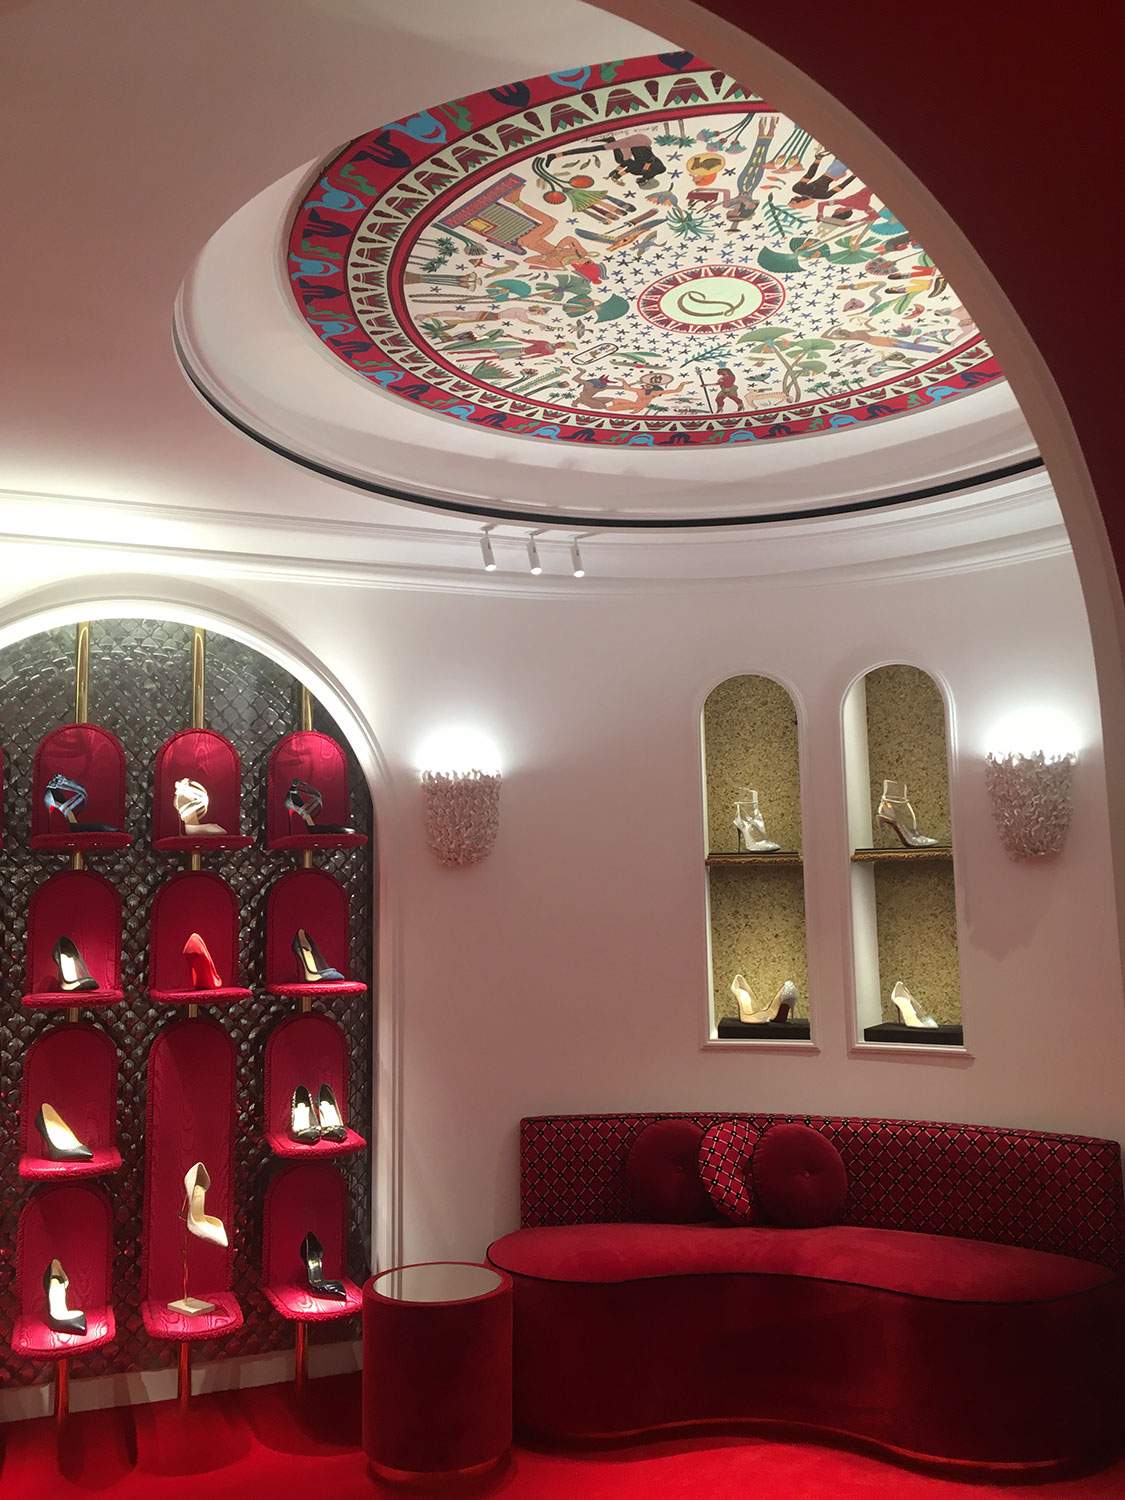 Ceiling with cornices made of fibrous plaster for the renovation of the Louboutin women's boutique in Paris